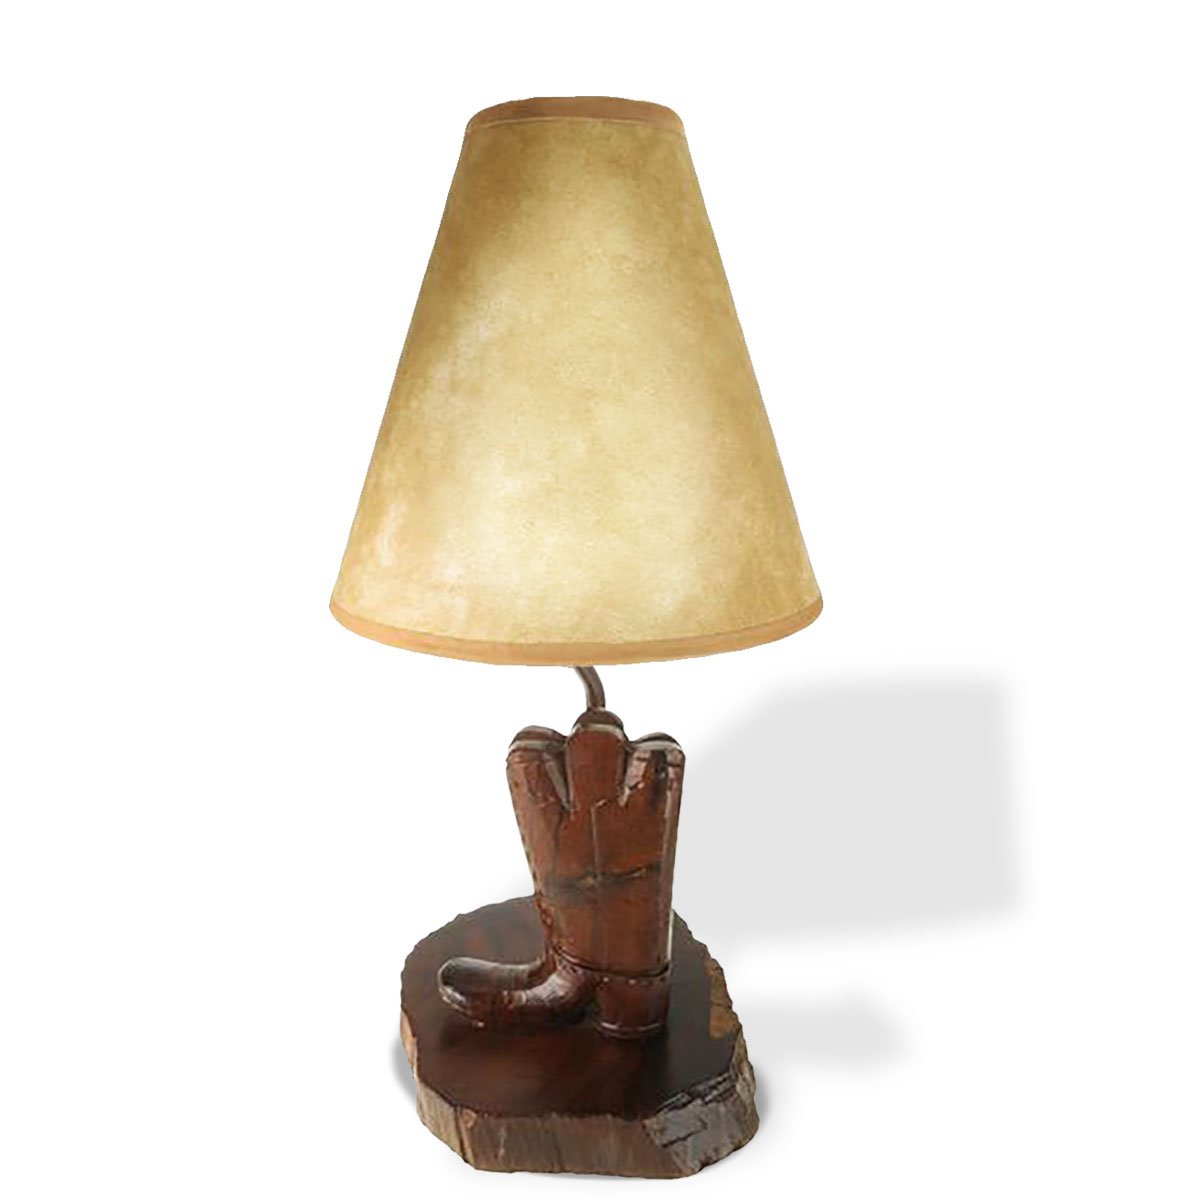 172021 - Boot Carved Ironwood Vanity Lamp with Shade